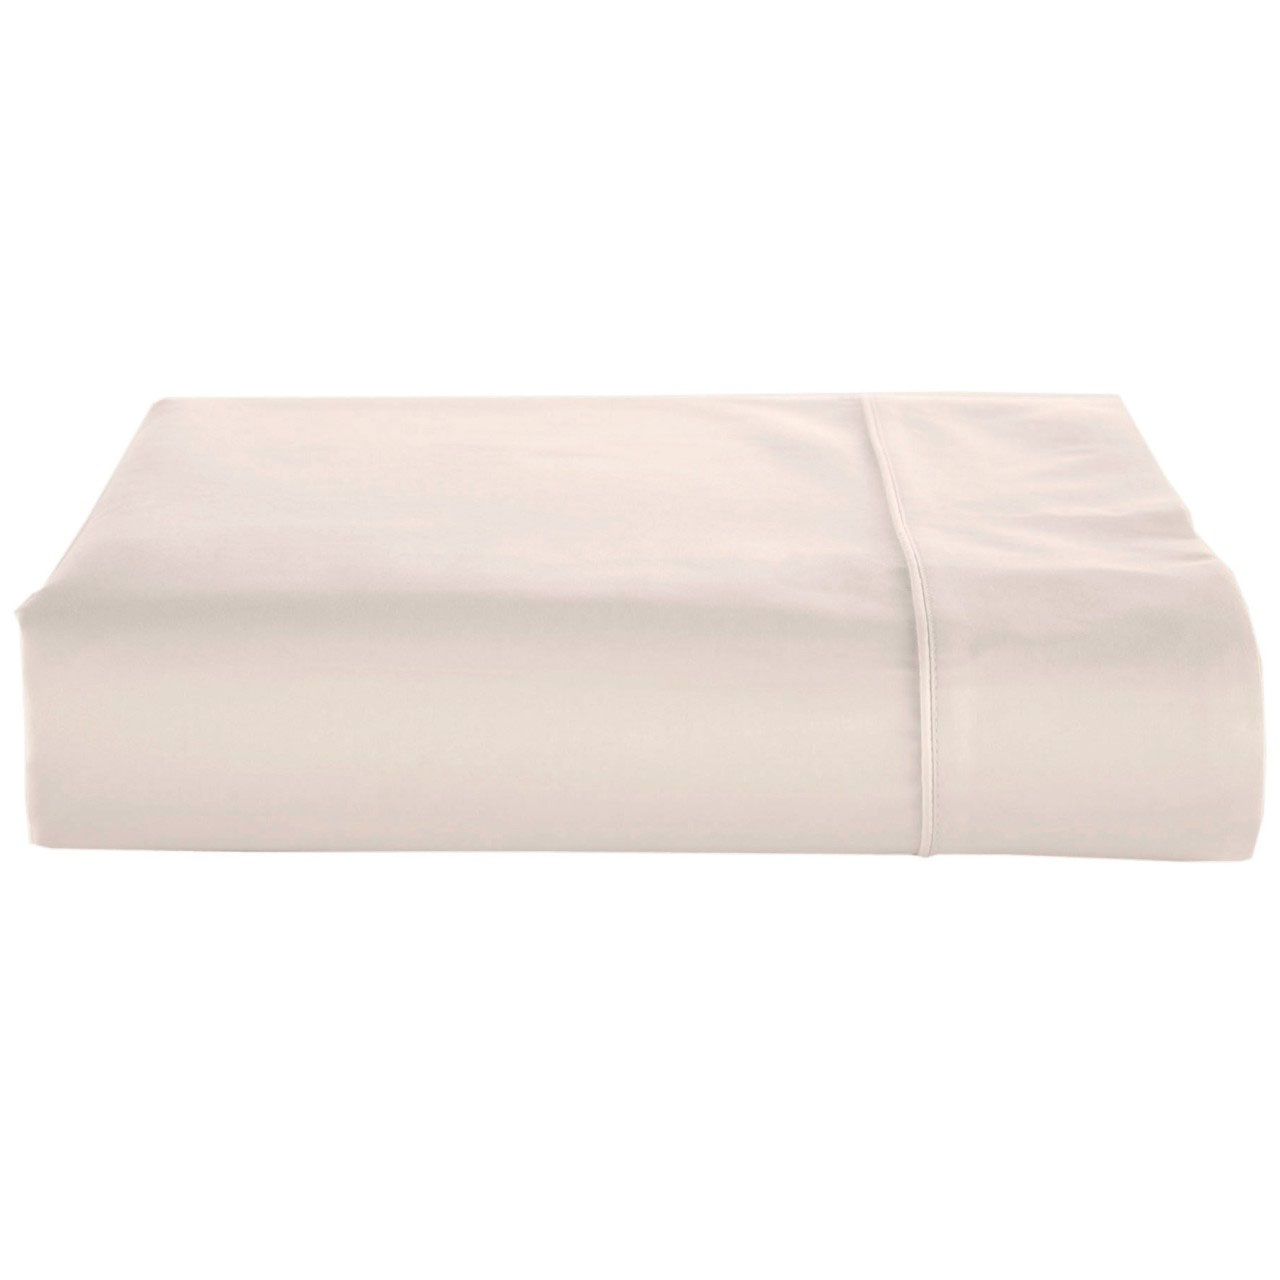 1000 Thread Count Egyptian Cotton 38cm Deep Fitted Sheet